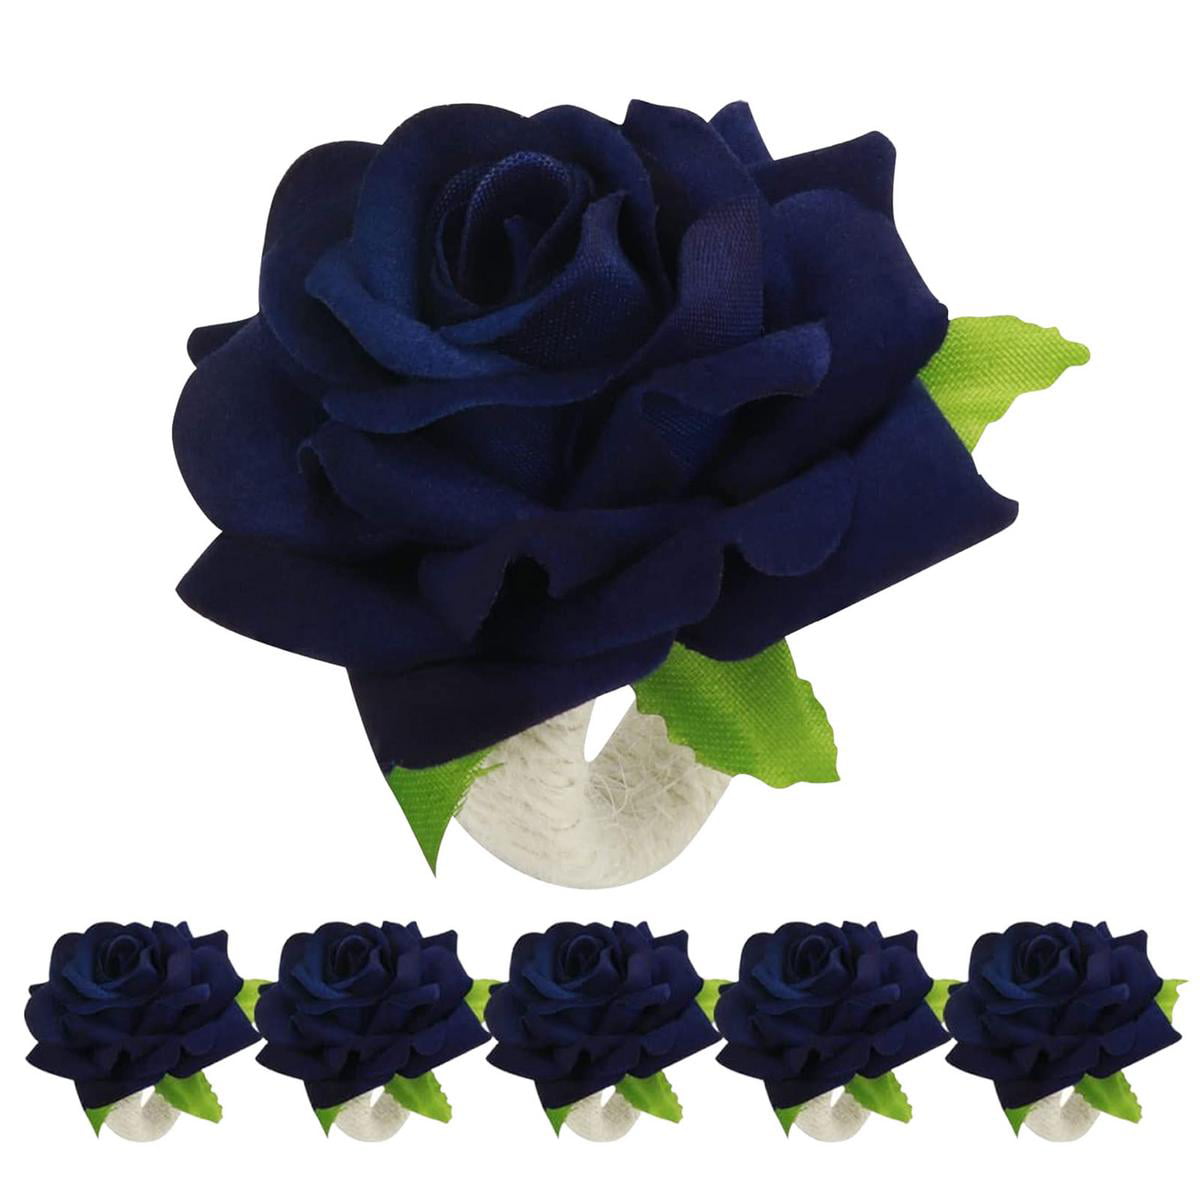 48 x 6cm Colorful Artificial Foam Rose Wedding/Craft Flowers 8 bunches of 6 